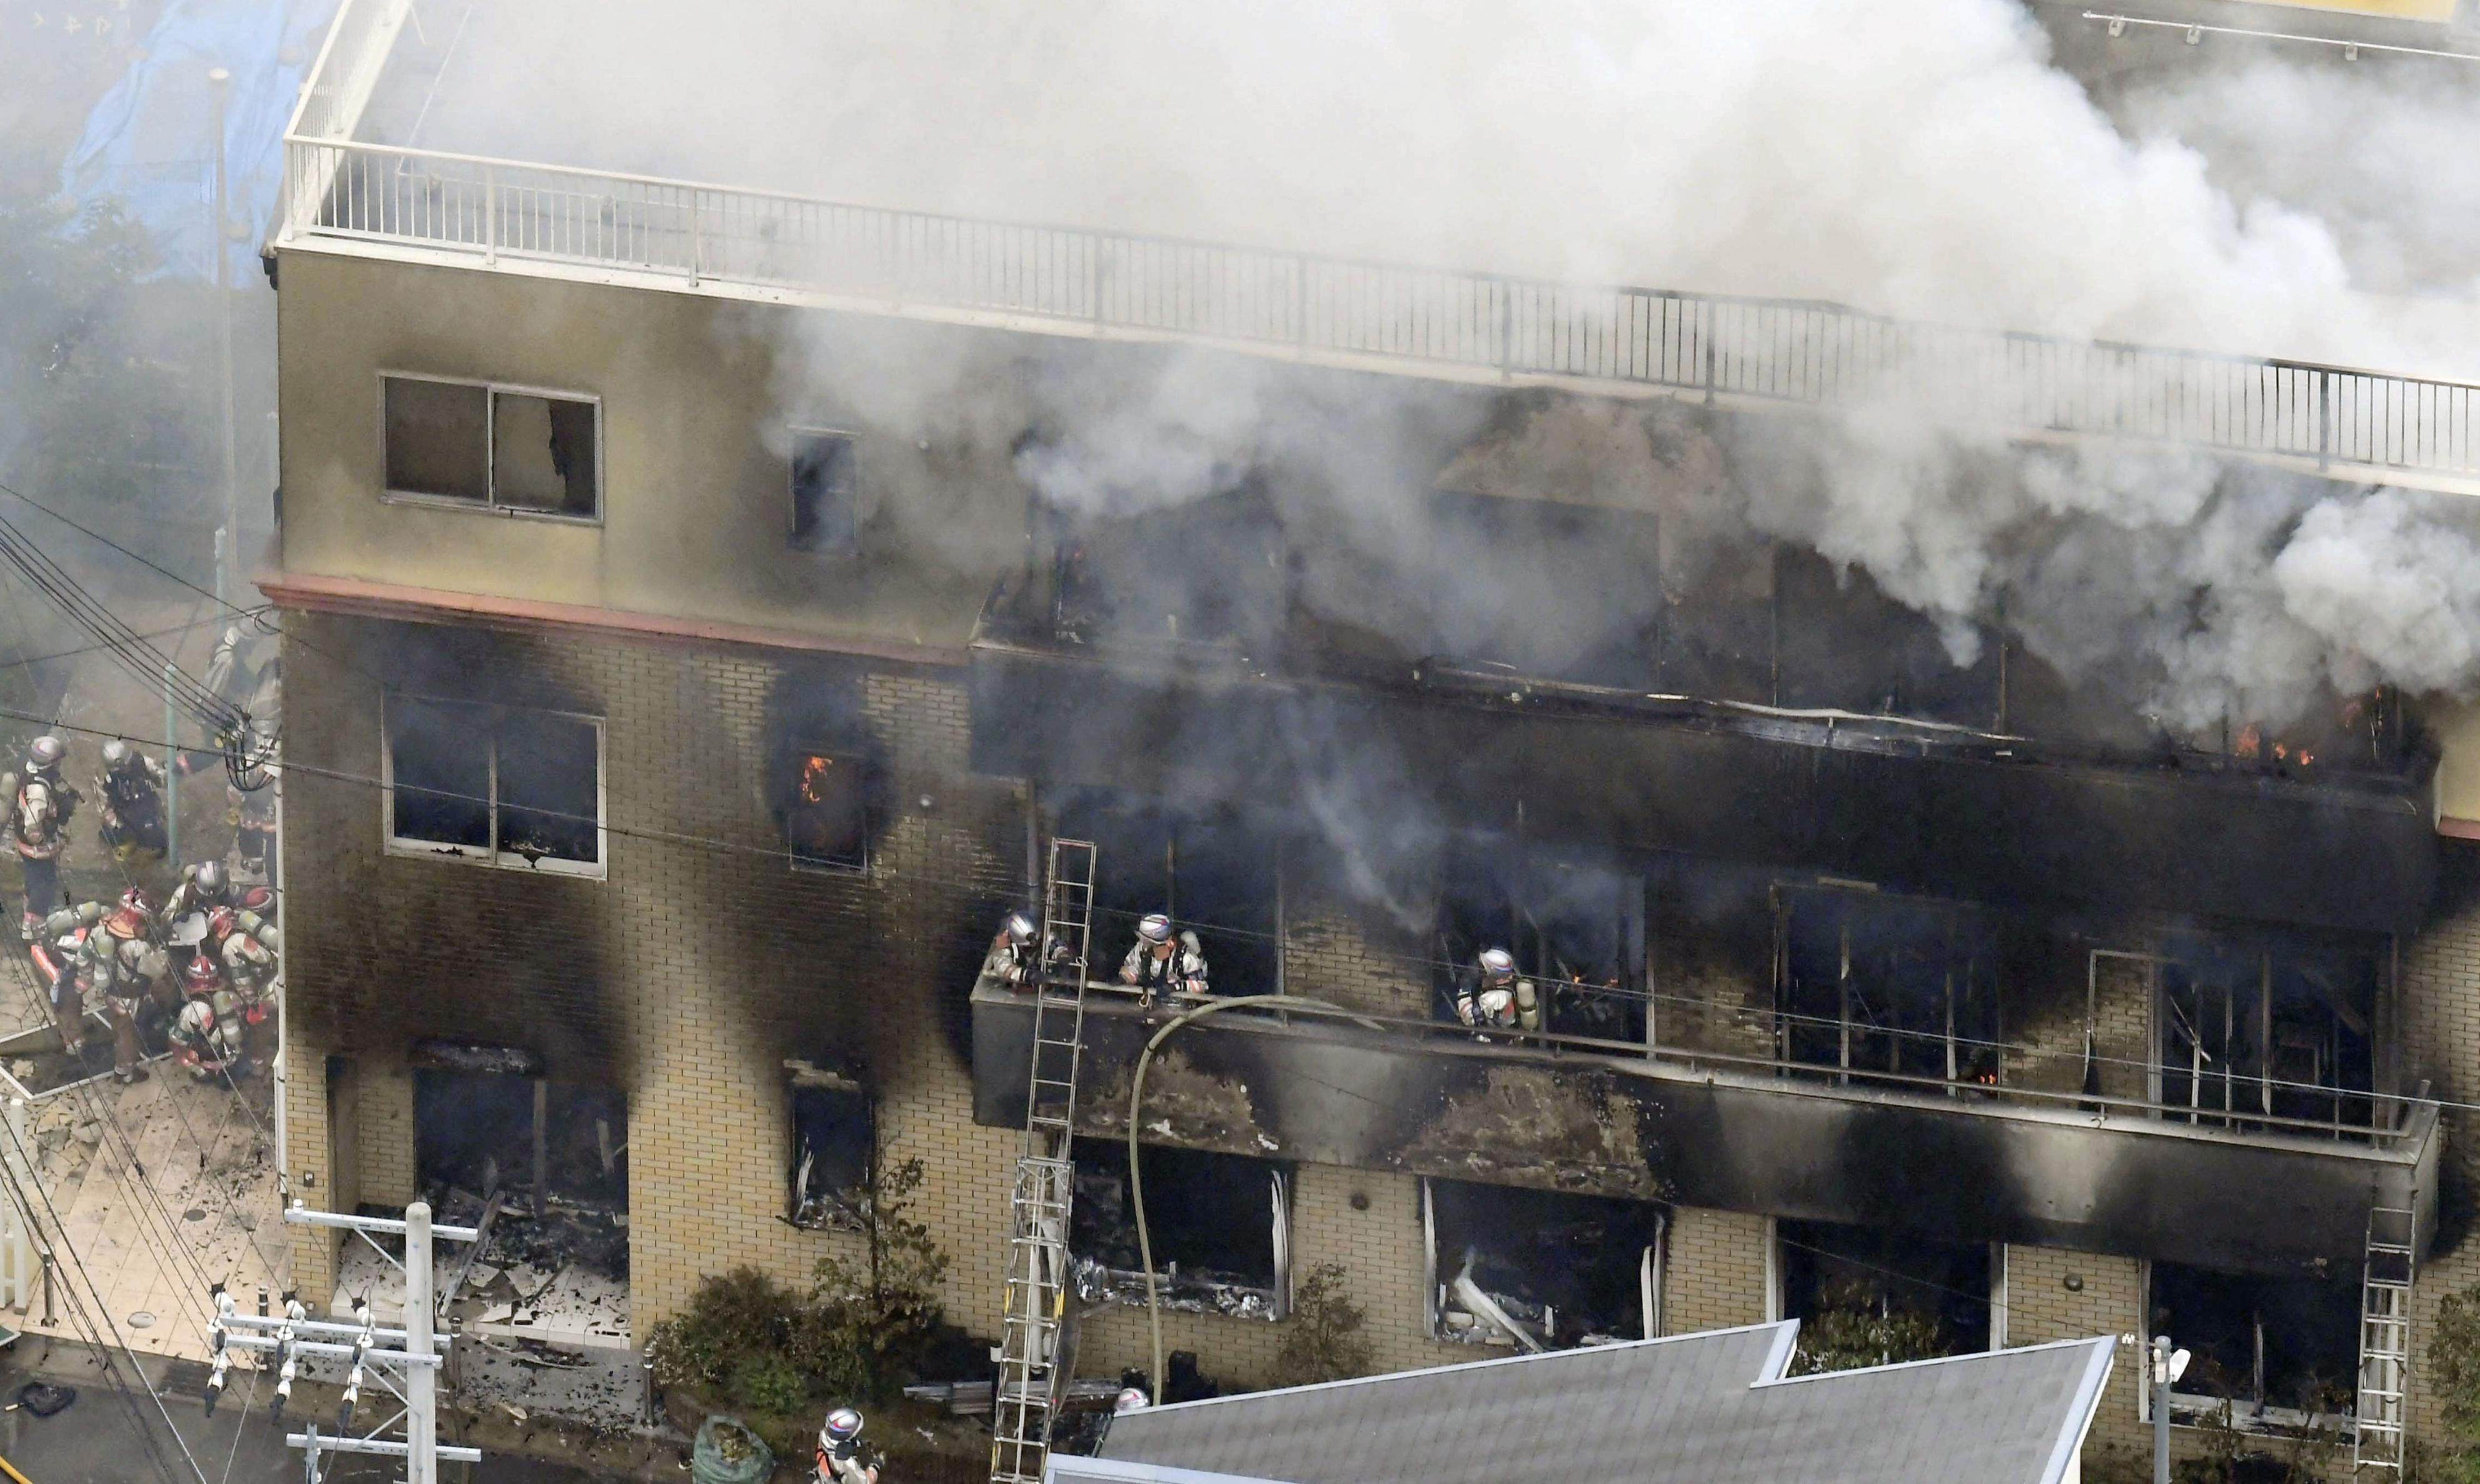 Firefighters battle the blaze at Kyoto Animation’s studios in July 2019. Shinji Aoba admitted on Tuesday to starting the fire that left 36 people dead. Photo: Kyodo News via AP